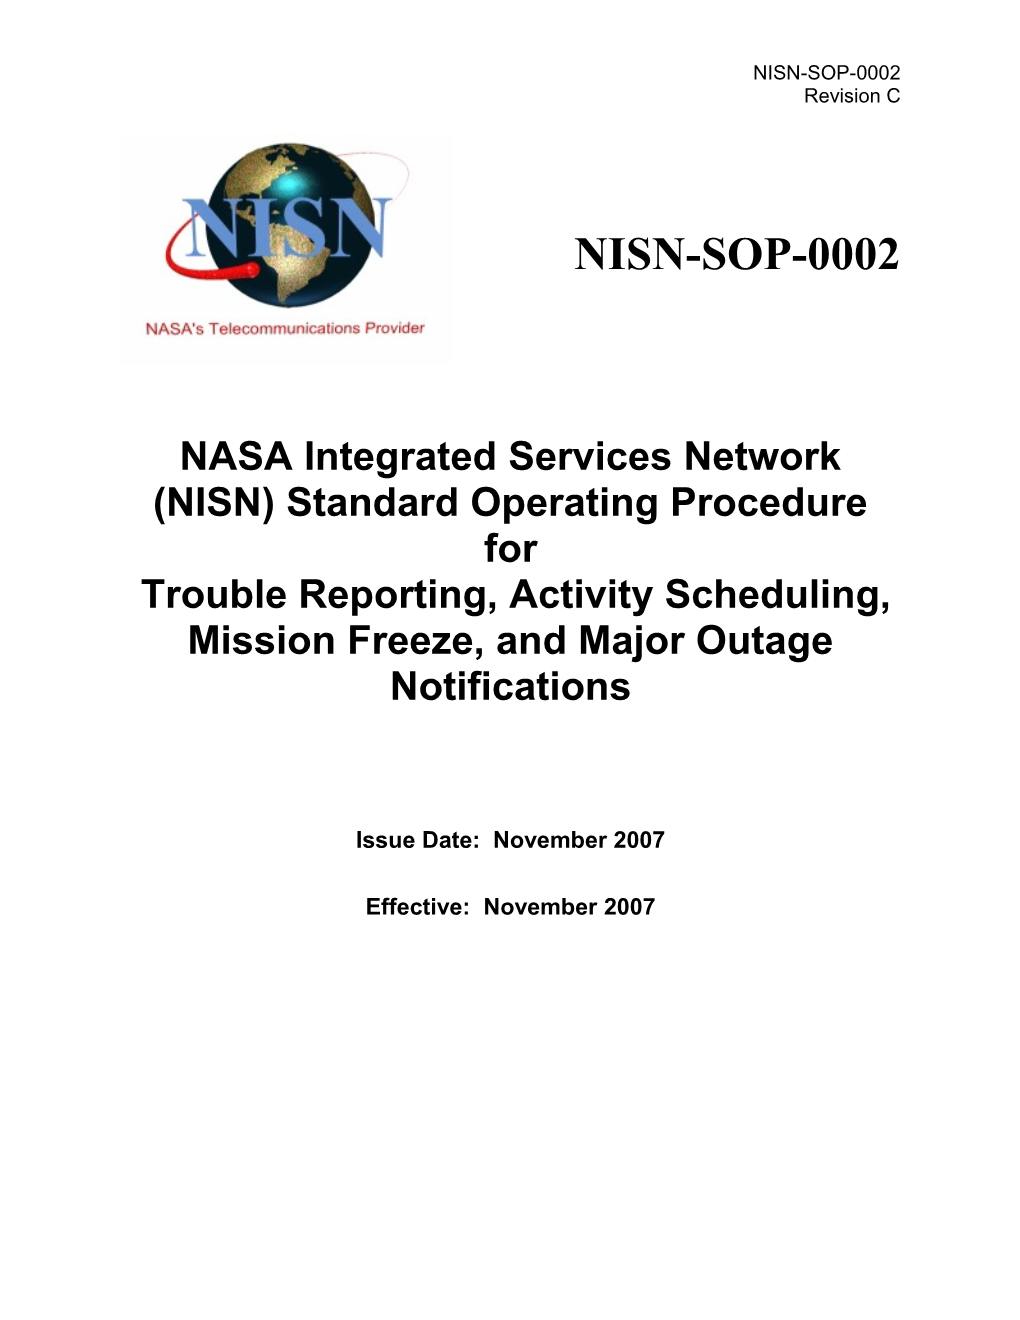 NISN SOP for Trouble Reporting, Activity Scheduling, Mission Freeze and Major Outage